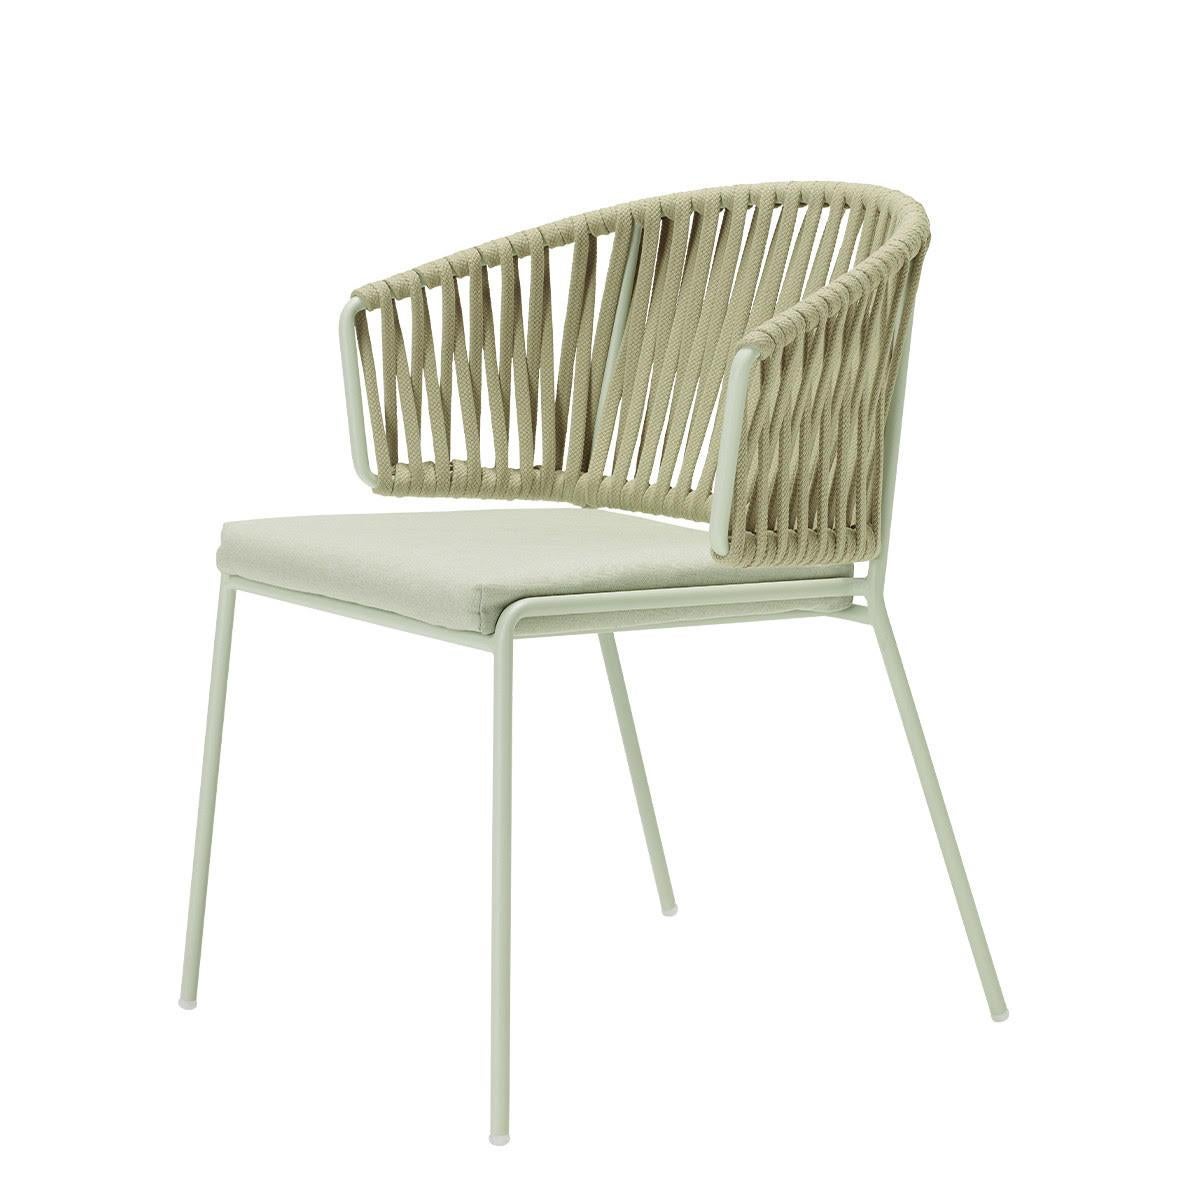 French Pair of Cream Outdoor or Indoor Metal and Cord Armchairs, 21 century For Sale